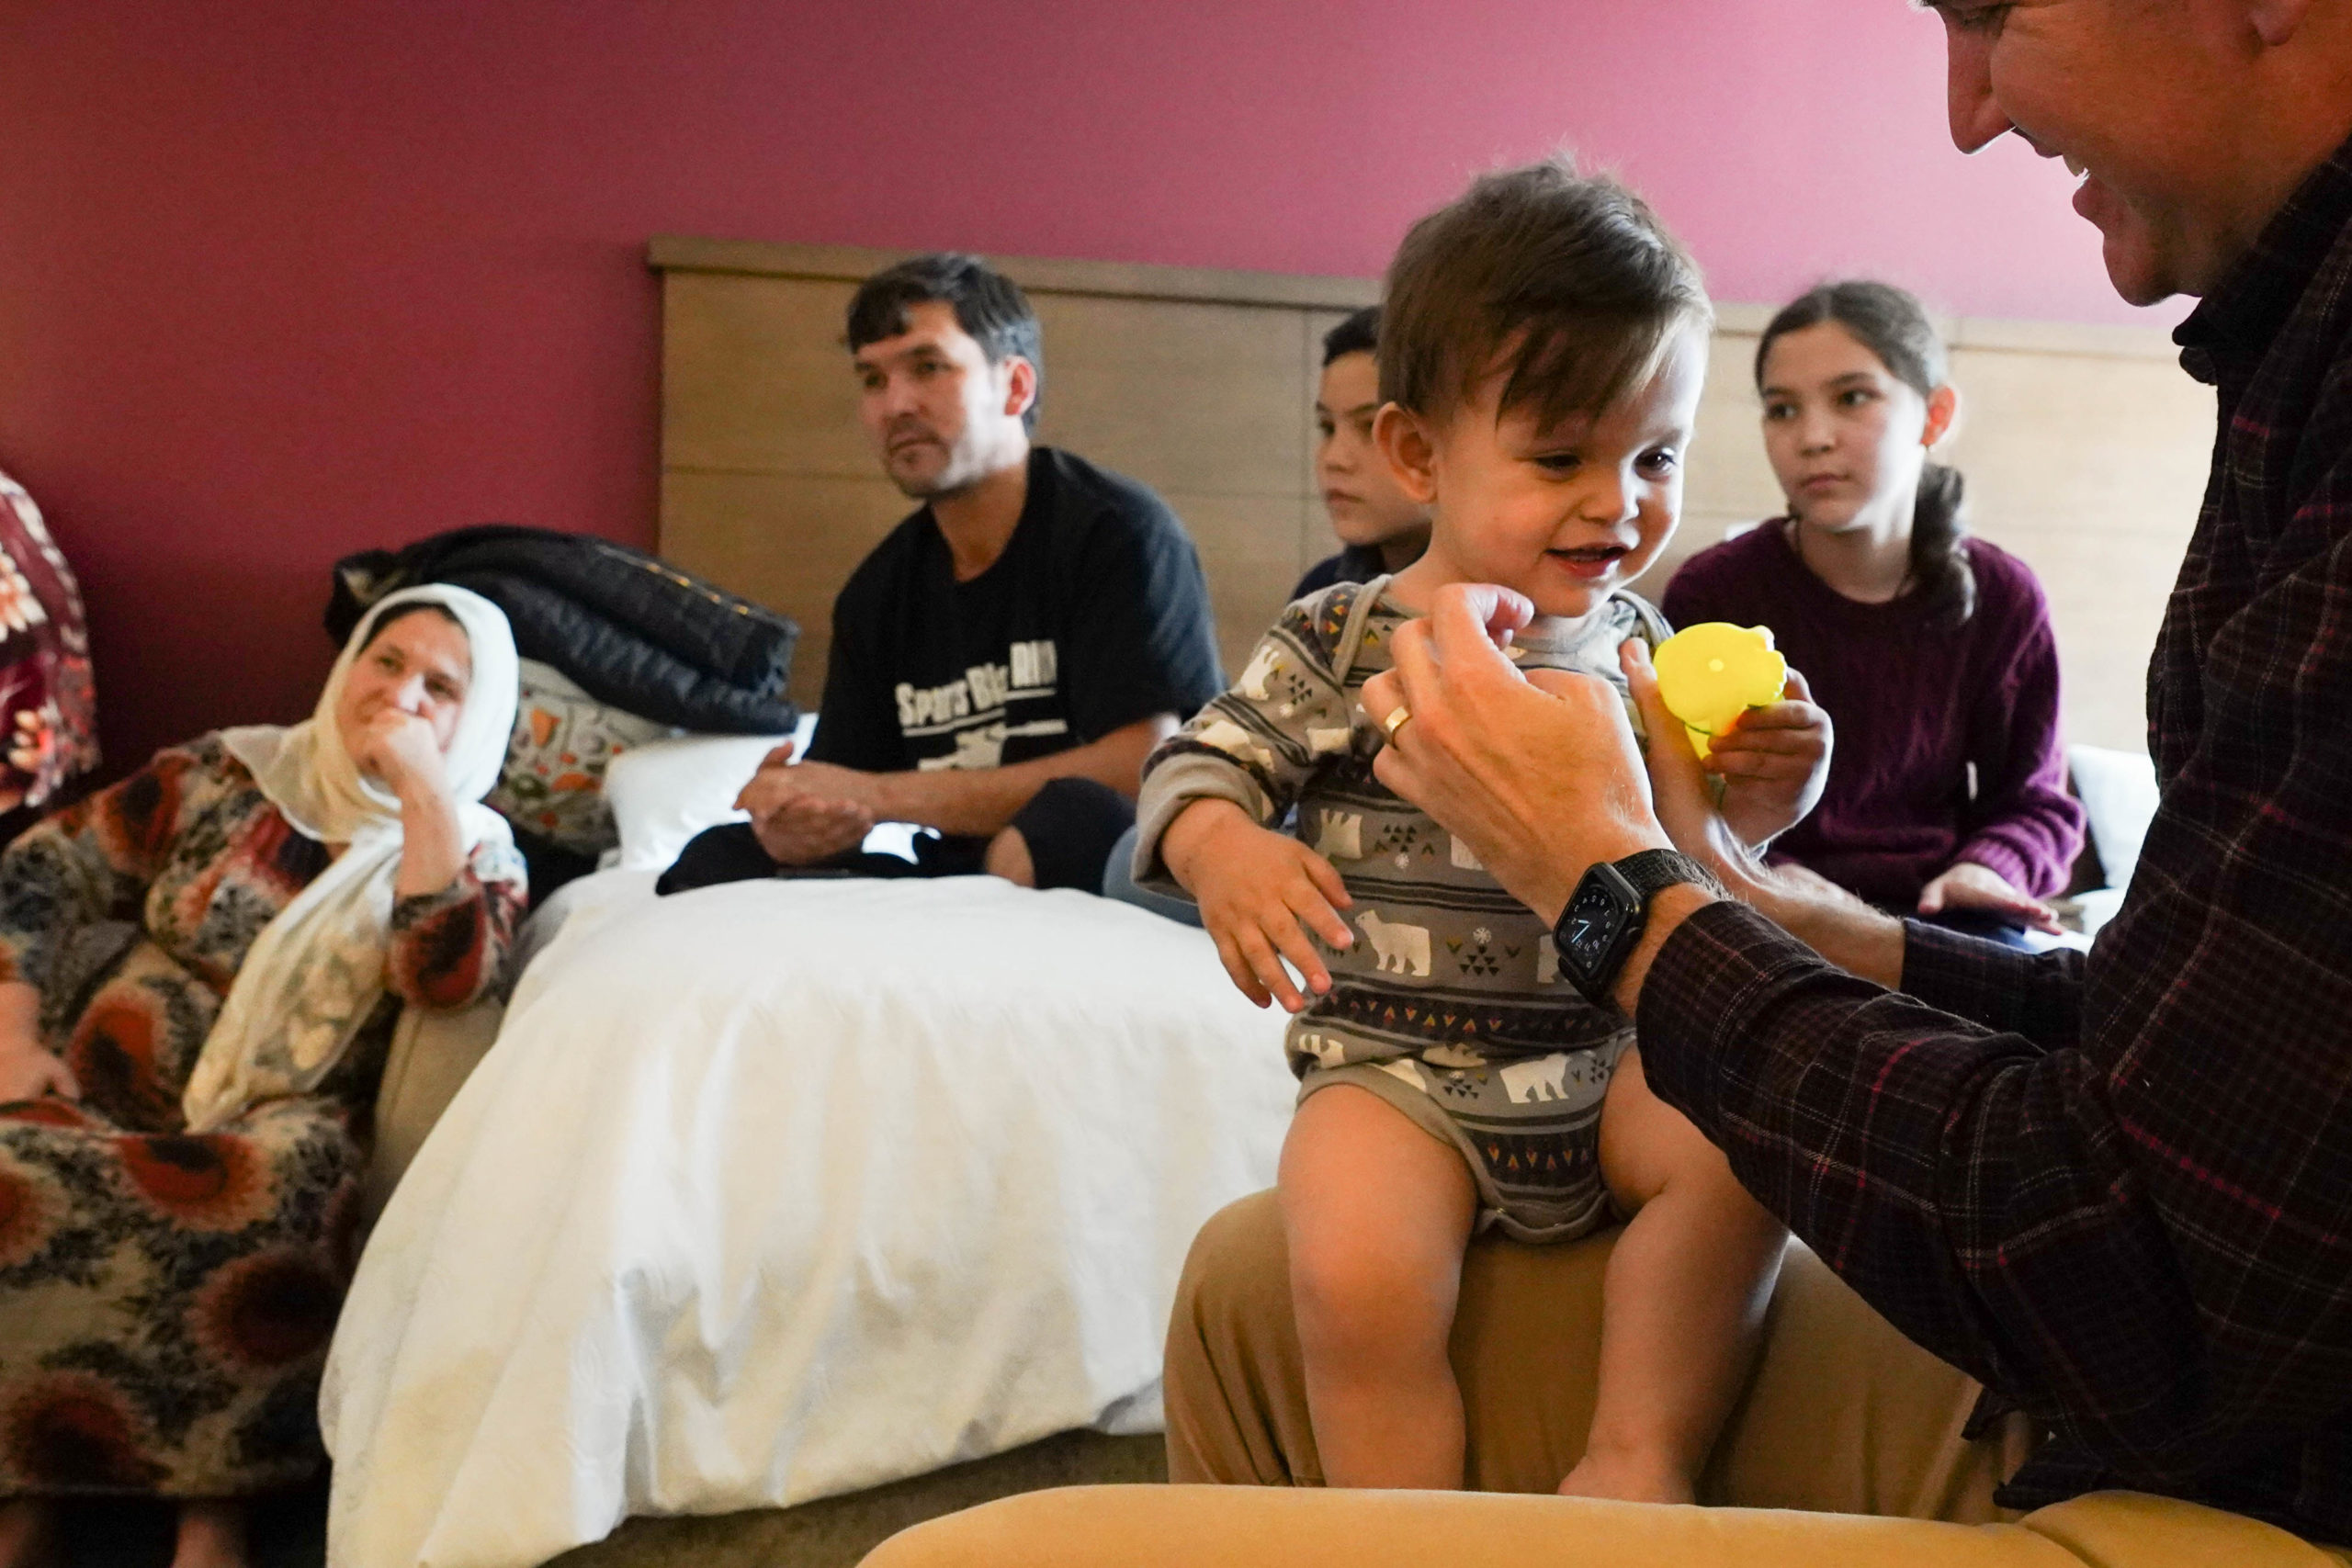 Utah residents step up to serve refugees like this newly arrived Afghan family...